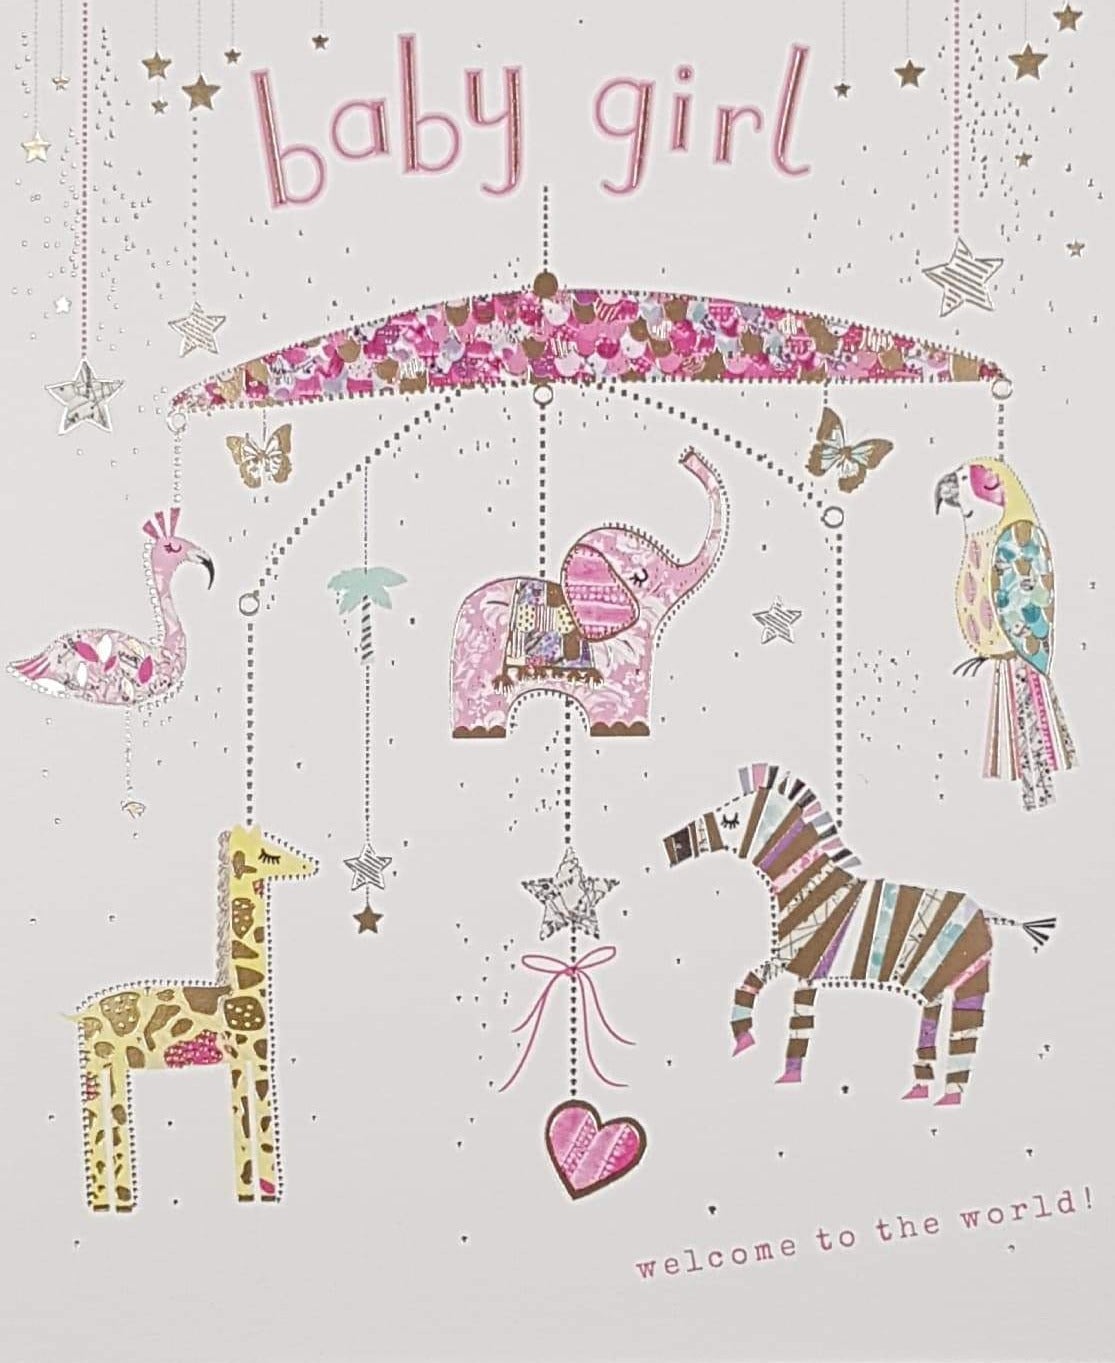 New Baby Card - Girl / A Baby Carousel With Animals